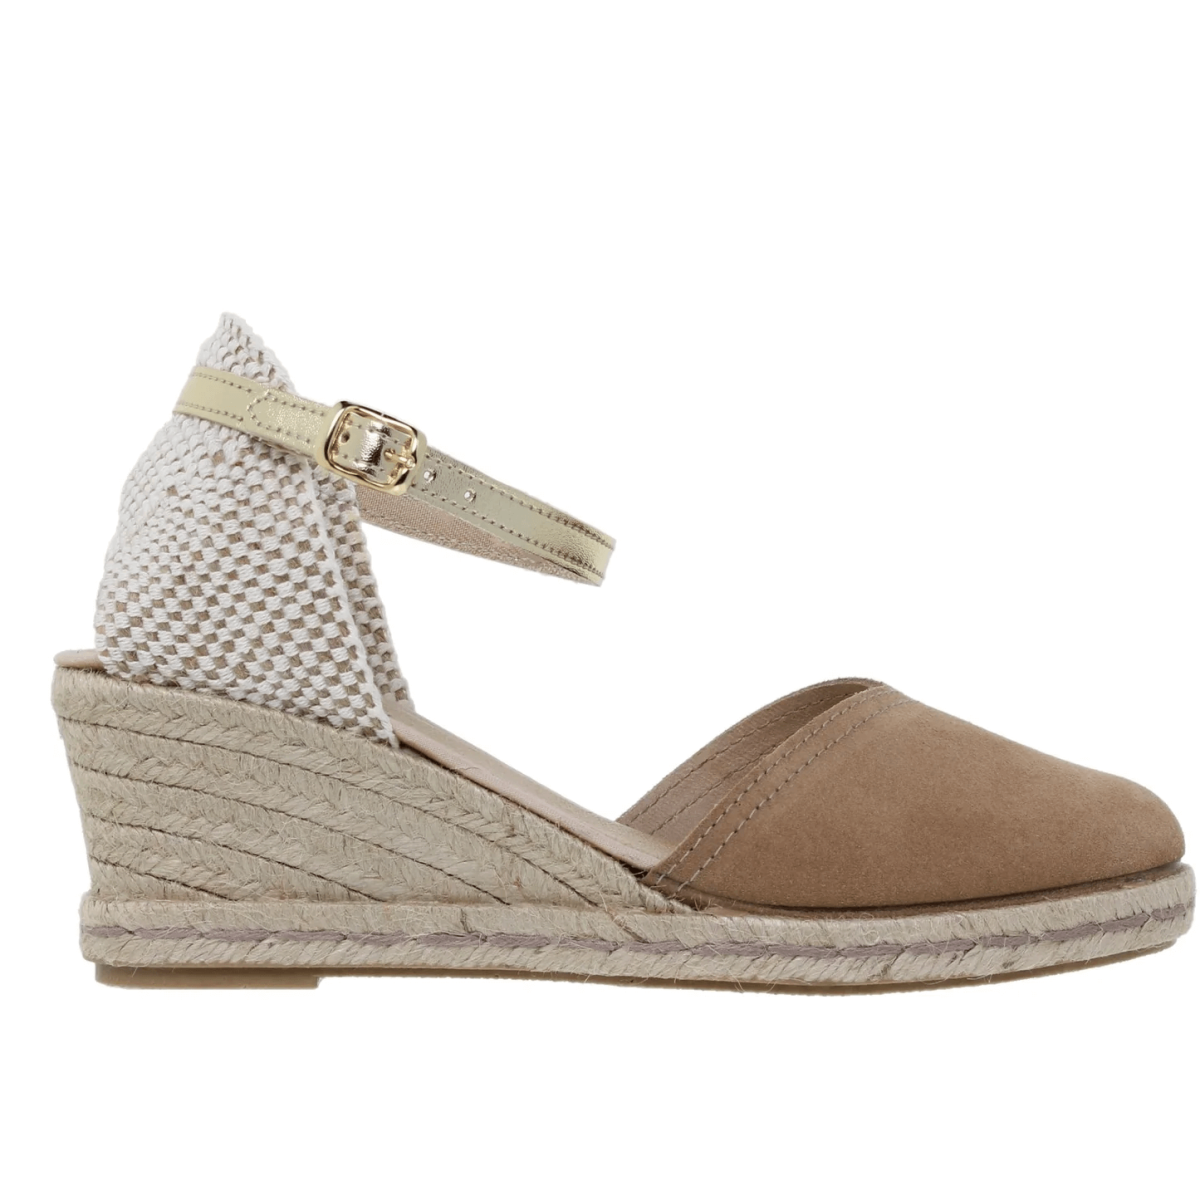 Sand leather espadrilles by Amelie